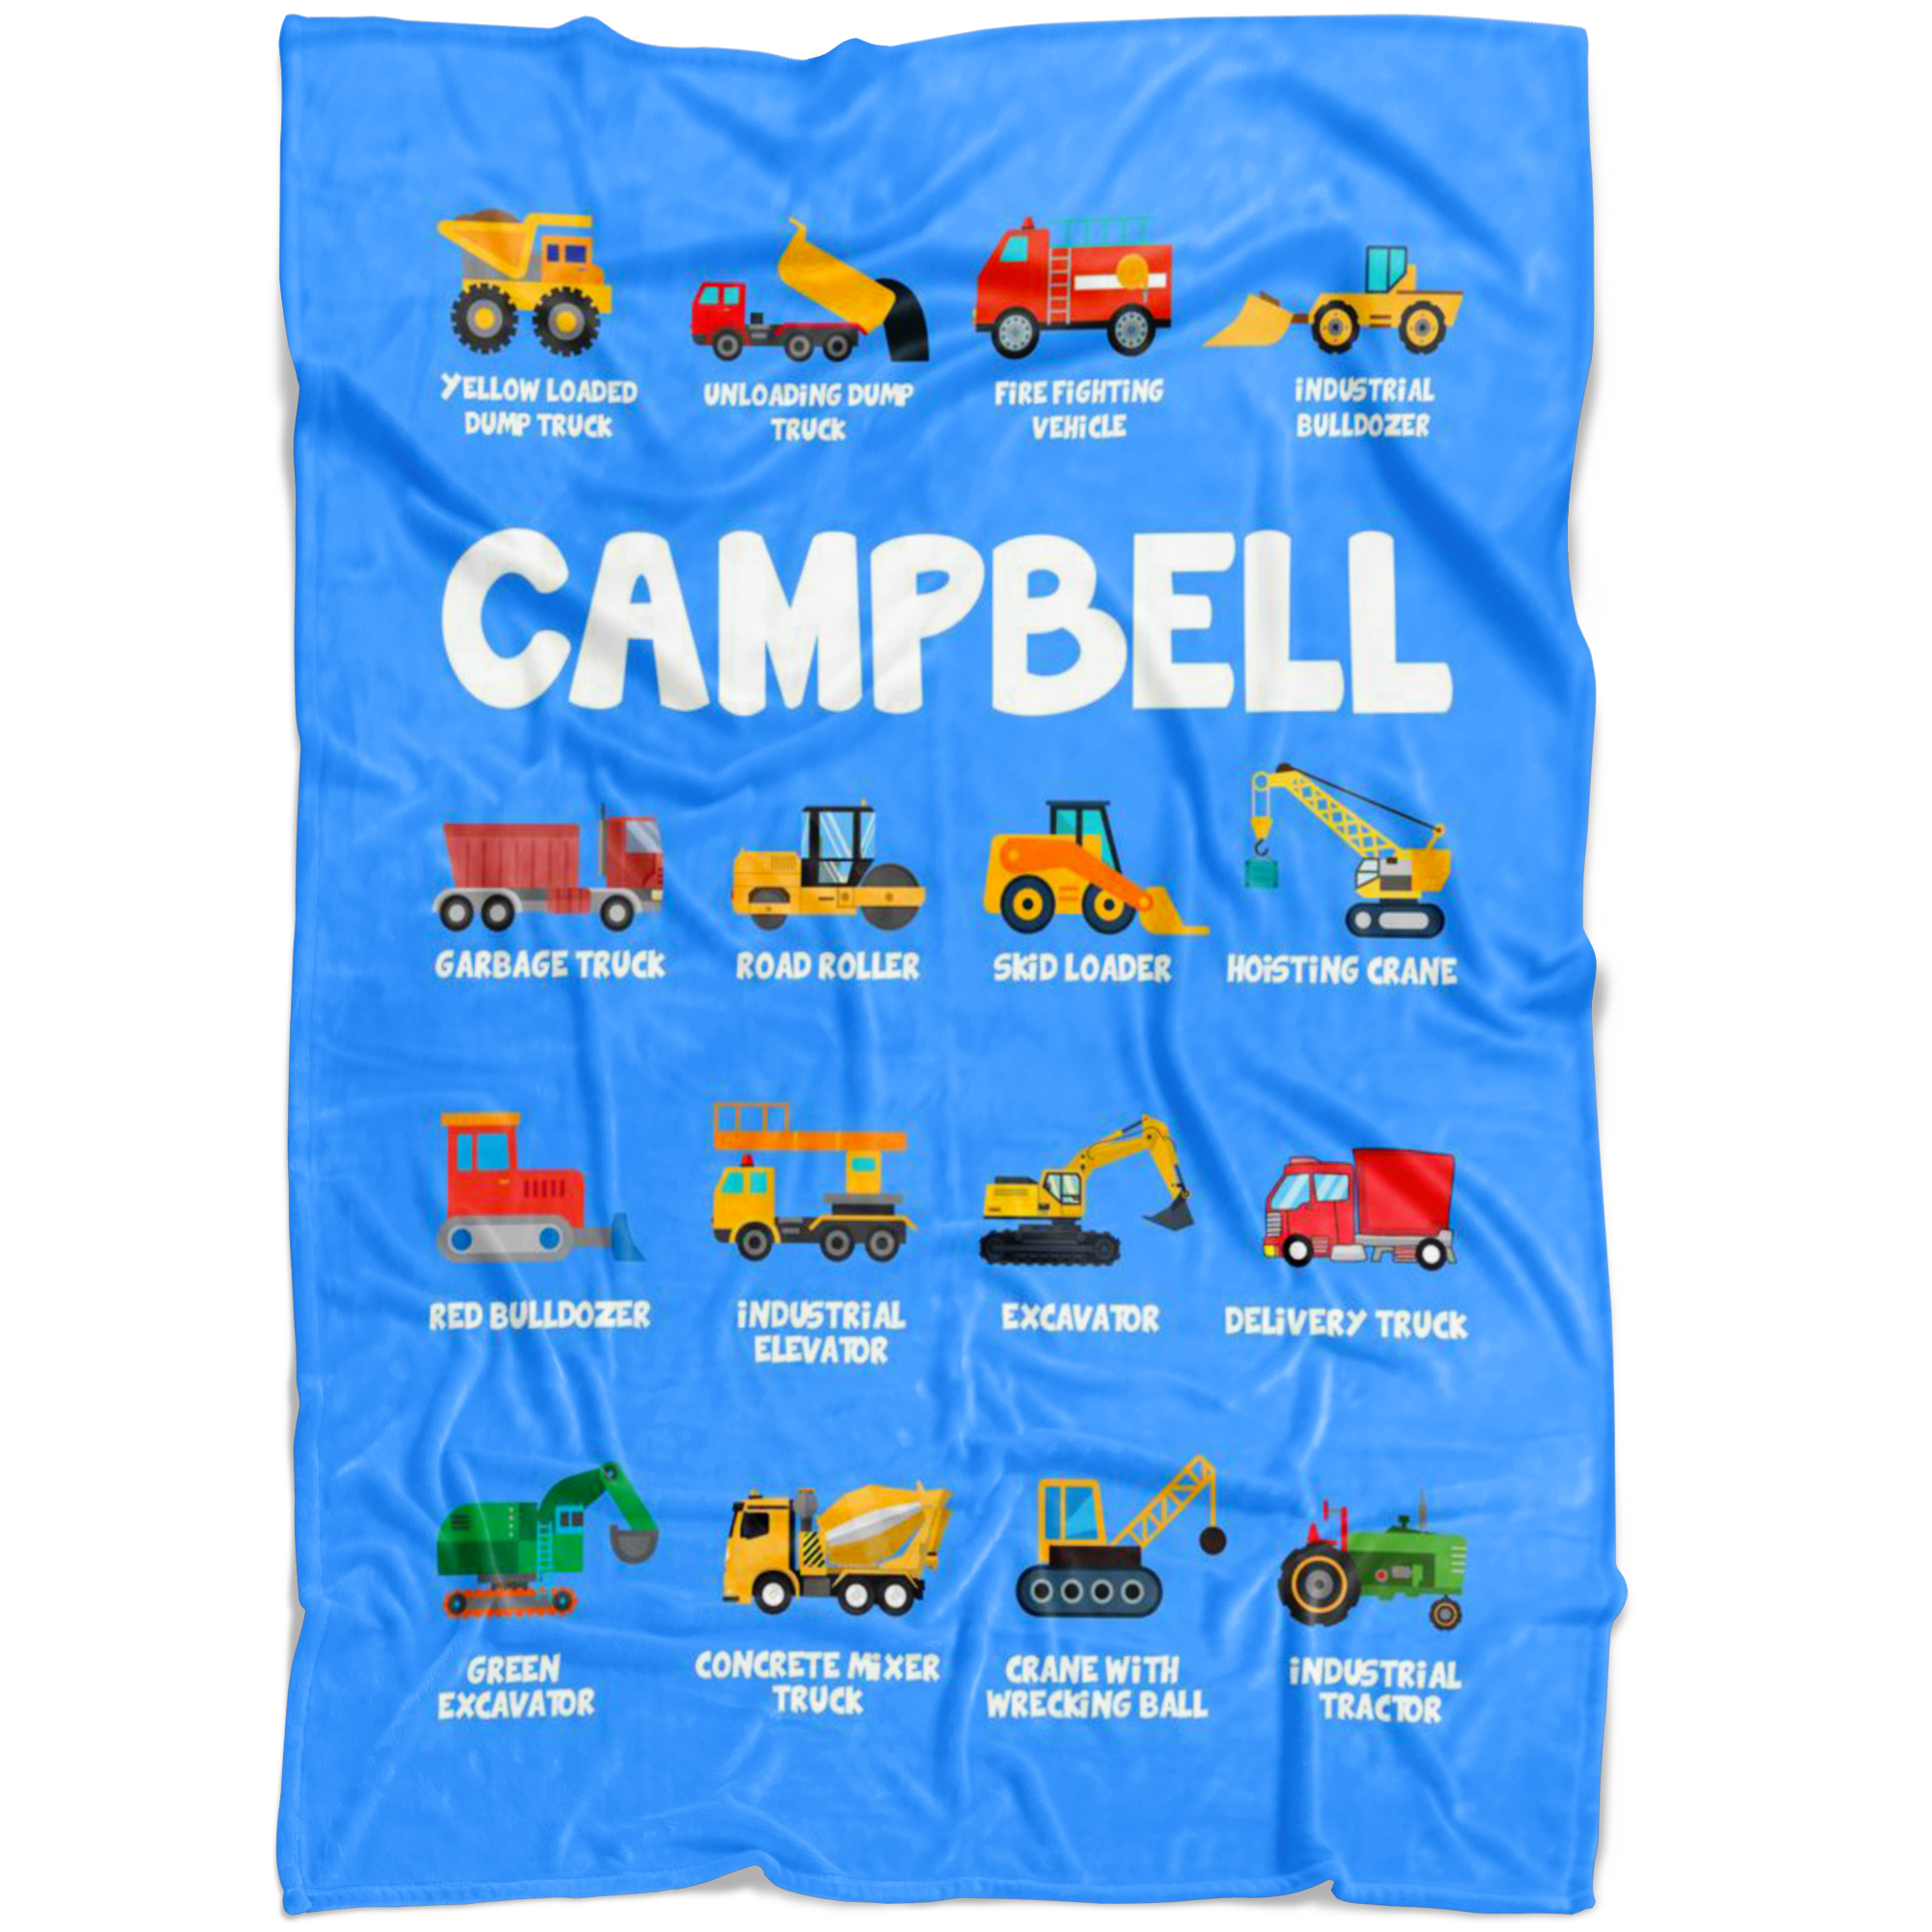 CAMPBELL Construction Blanket Blue